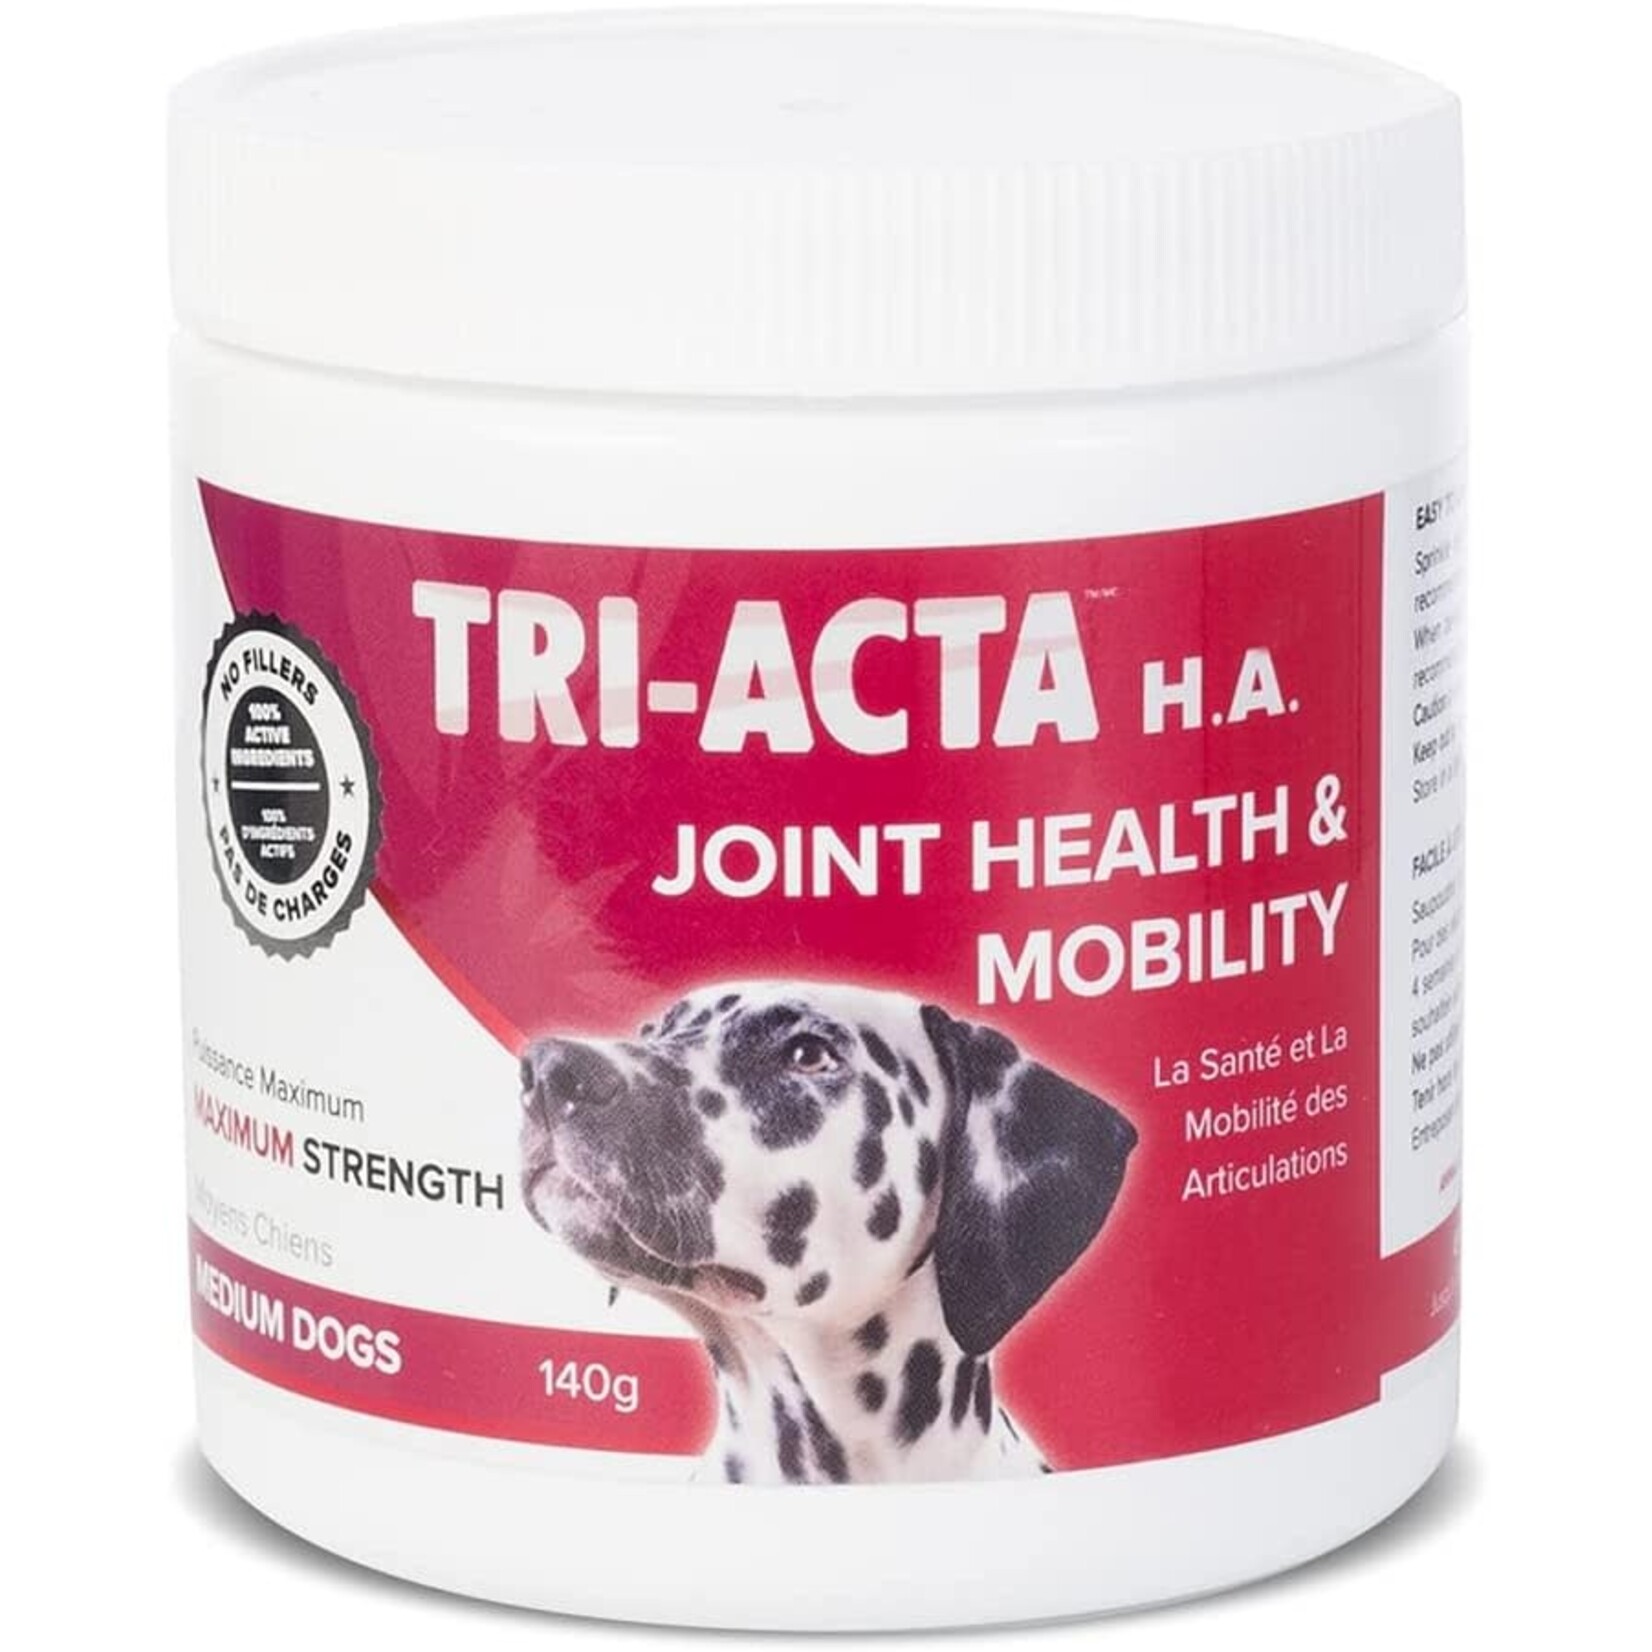 Tri-Acta Maximum Strength Joint Health + Mobility 140g For Medium Dogs